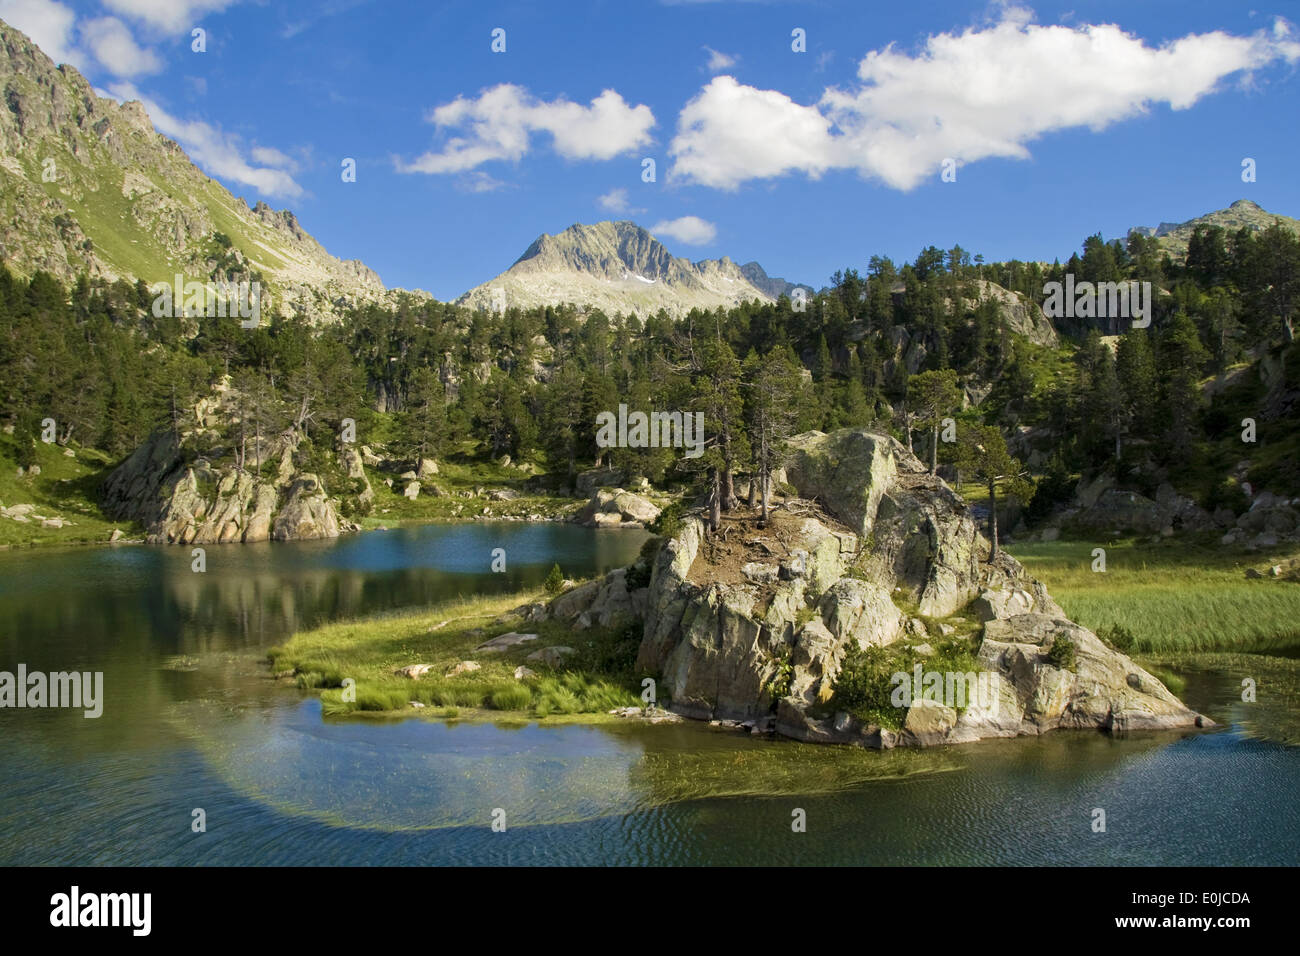 Lake with a small islet in the Aran Valley, Catalan Pyrenees. Stock Photo